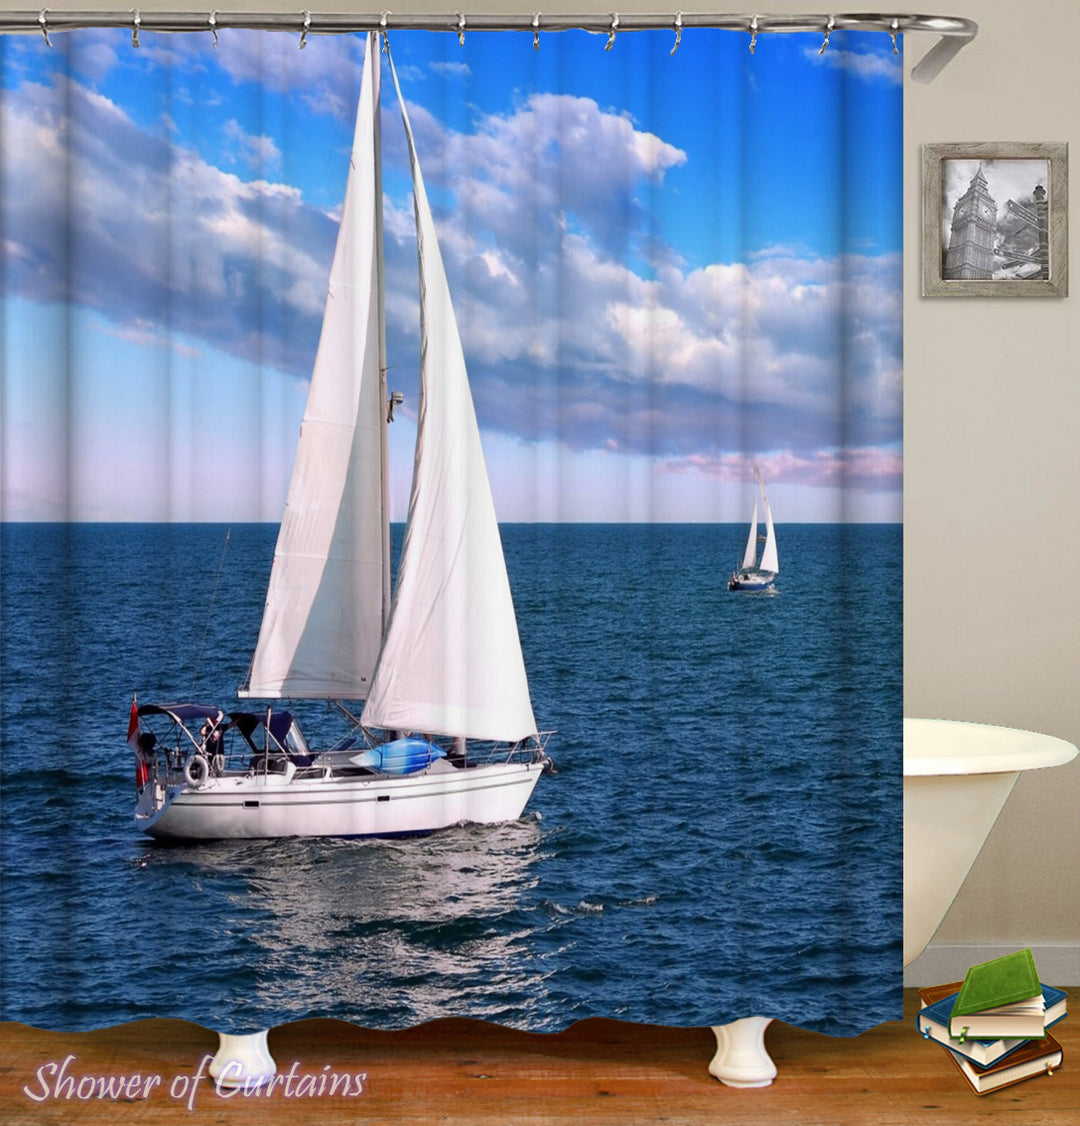 Sailboat Shower Curtain At Open Sea - Nautical Shower Curtains